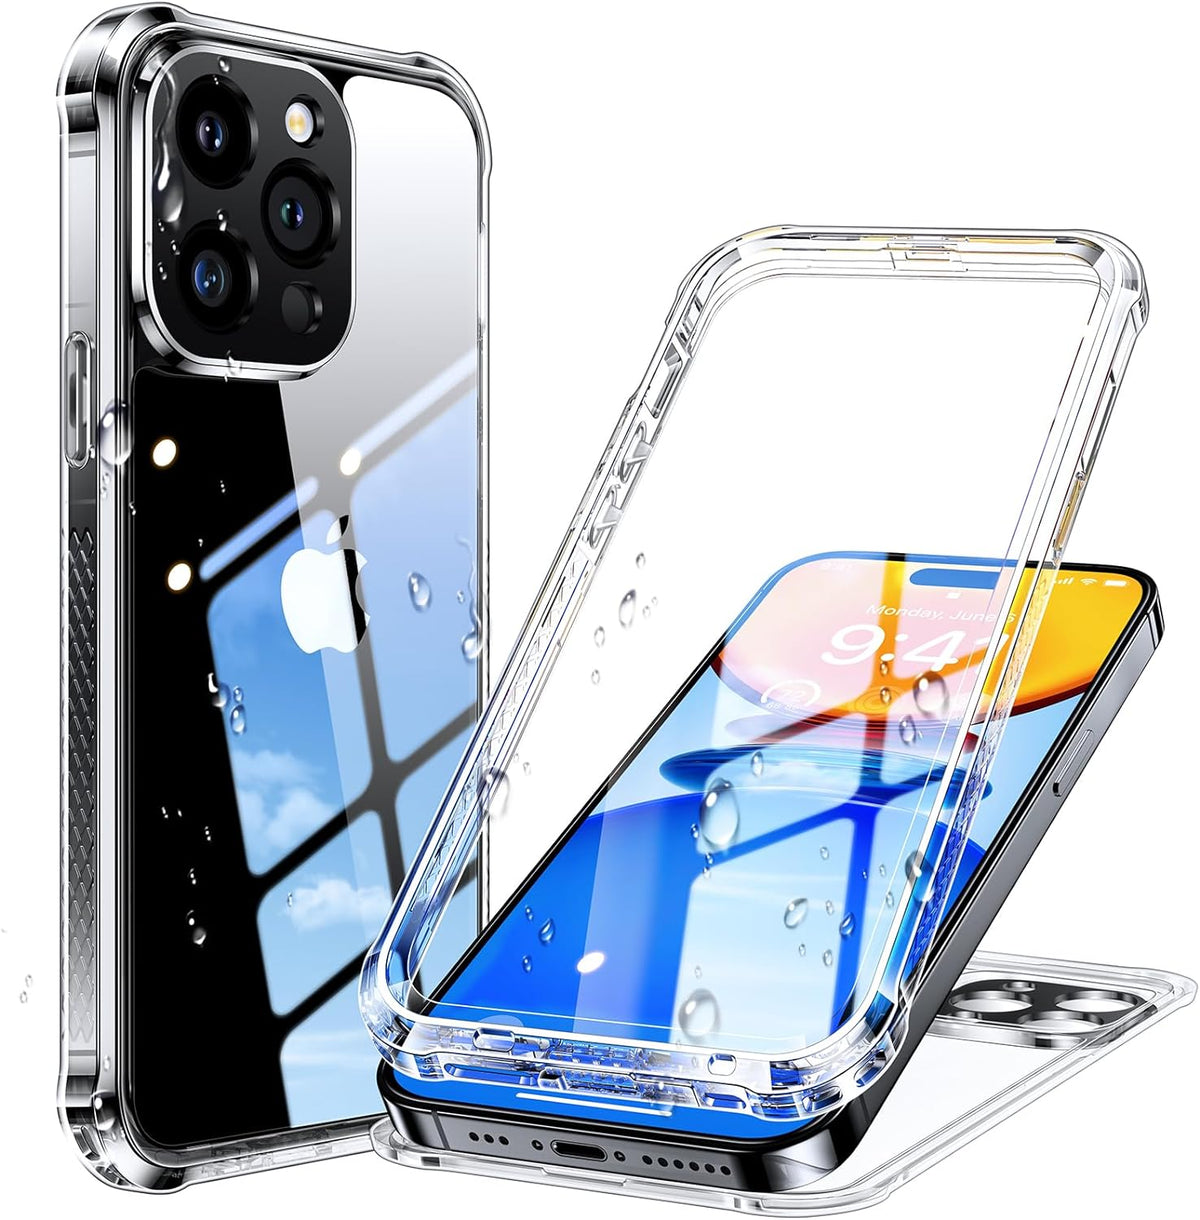 Humixx for iPhone 15 Pro Max Case Waterproof, [14 FT Military Dropproof][IP68 Underwater] Built-in Lens & Screen Protector Full Body Shockproof Dustproof Anti-Scratch for 15 Pro Max Phone Case ,Clear